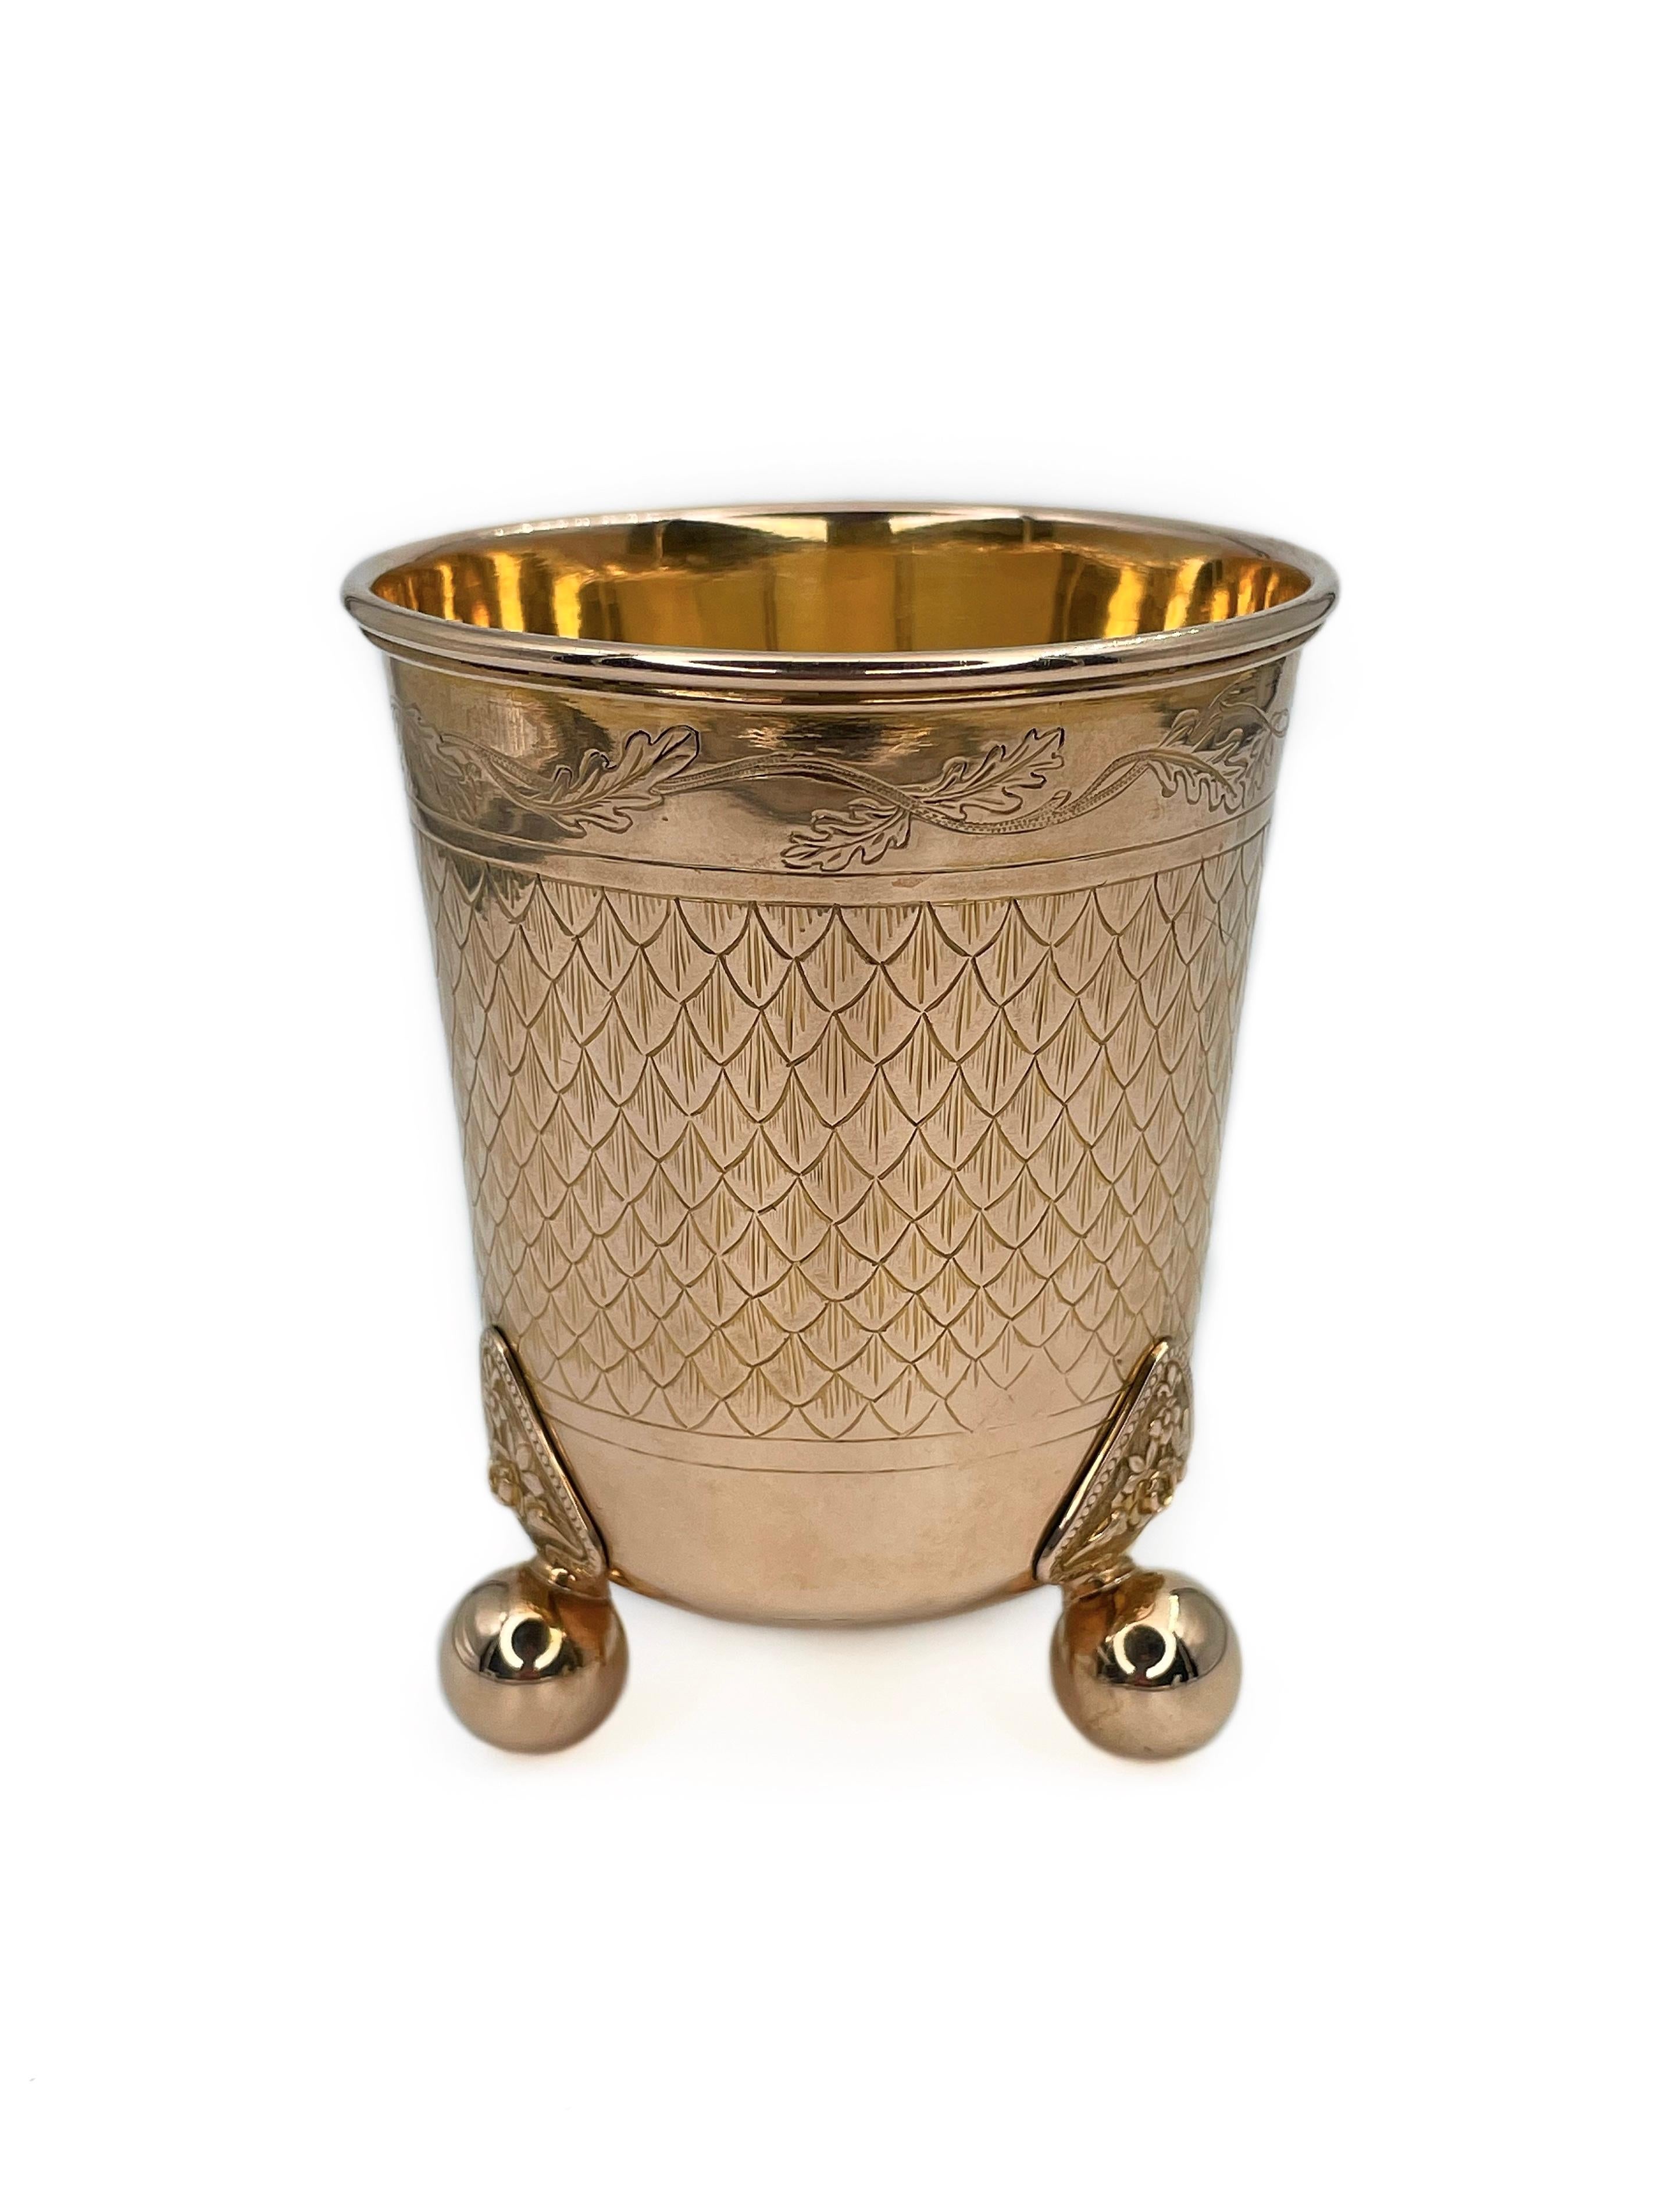 This is an antique 19th century beaker on ball feet made by Danish goldsmith Rasmus Jensen. The piece is crafted in 14K gold and is adorned with subtle floral ornamentations. 

There are numbers engraved inside: 1870 (shown in photo). 

Signed on